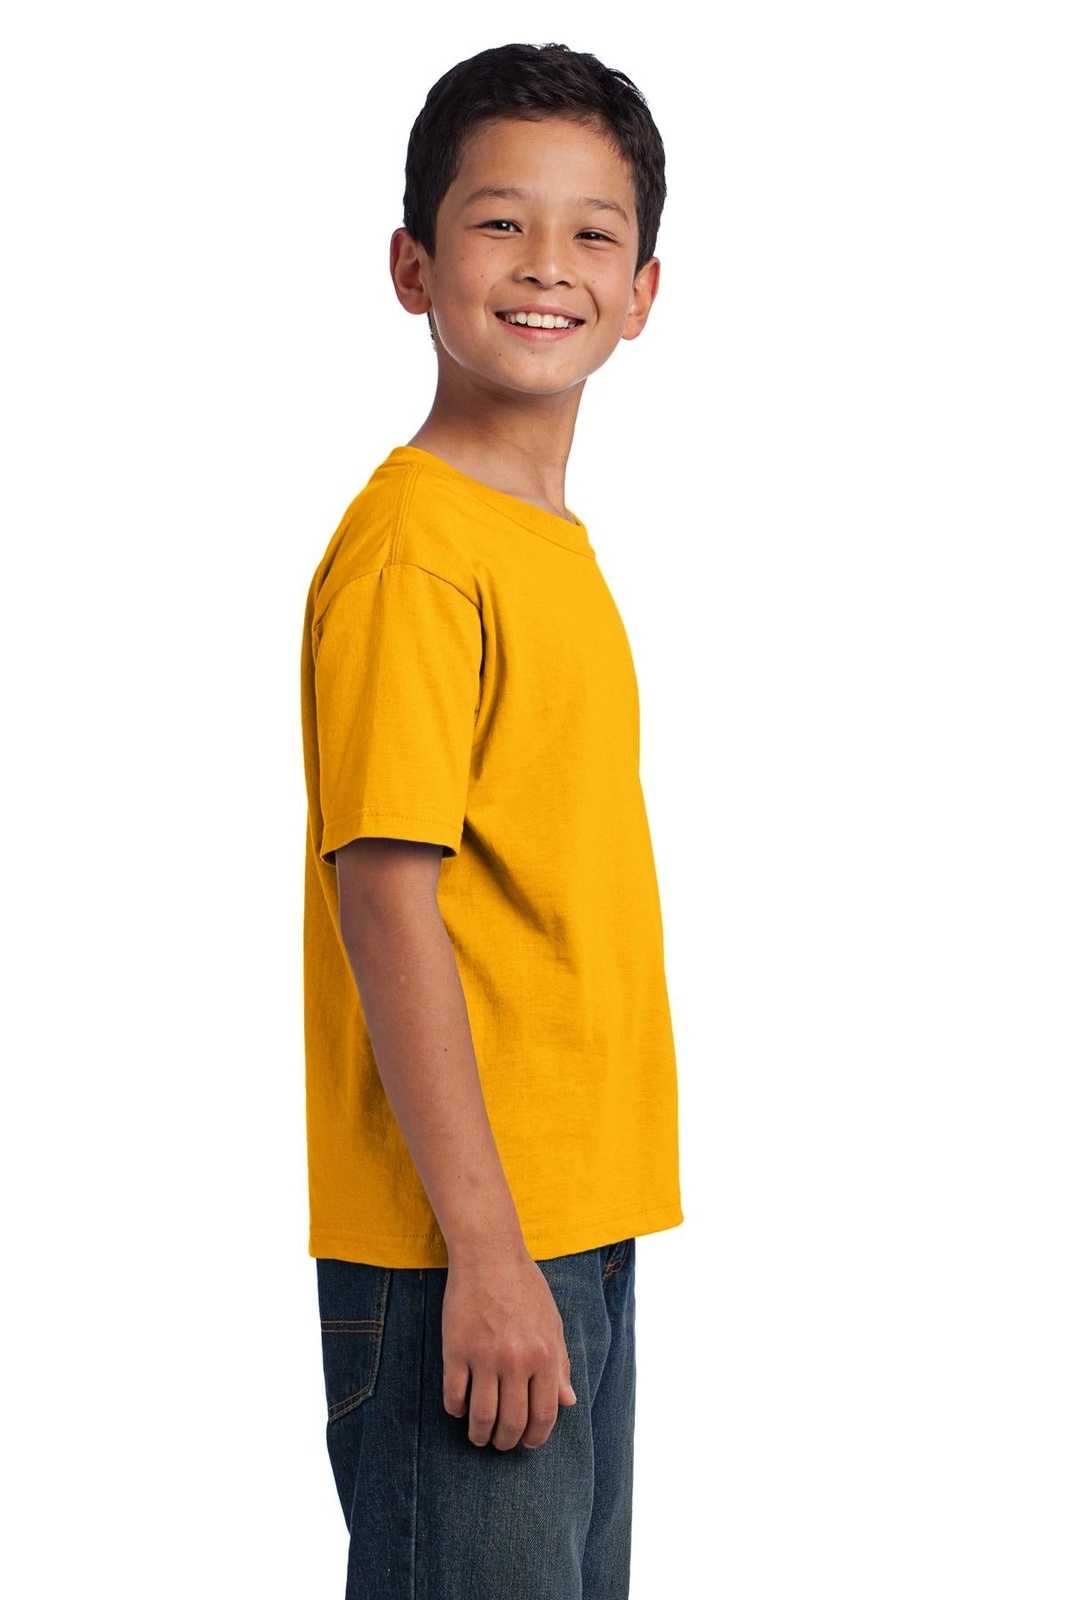 Fruit of the Loom 3930B Youth HD Cotton 100% Cotton T-Shirt - Gold - HIT a Double